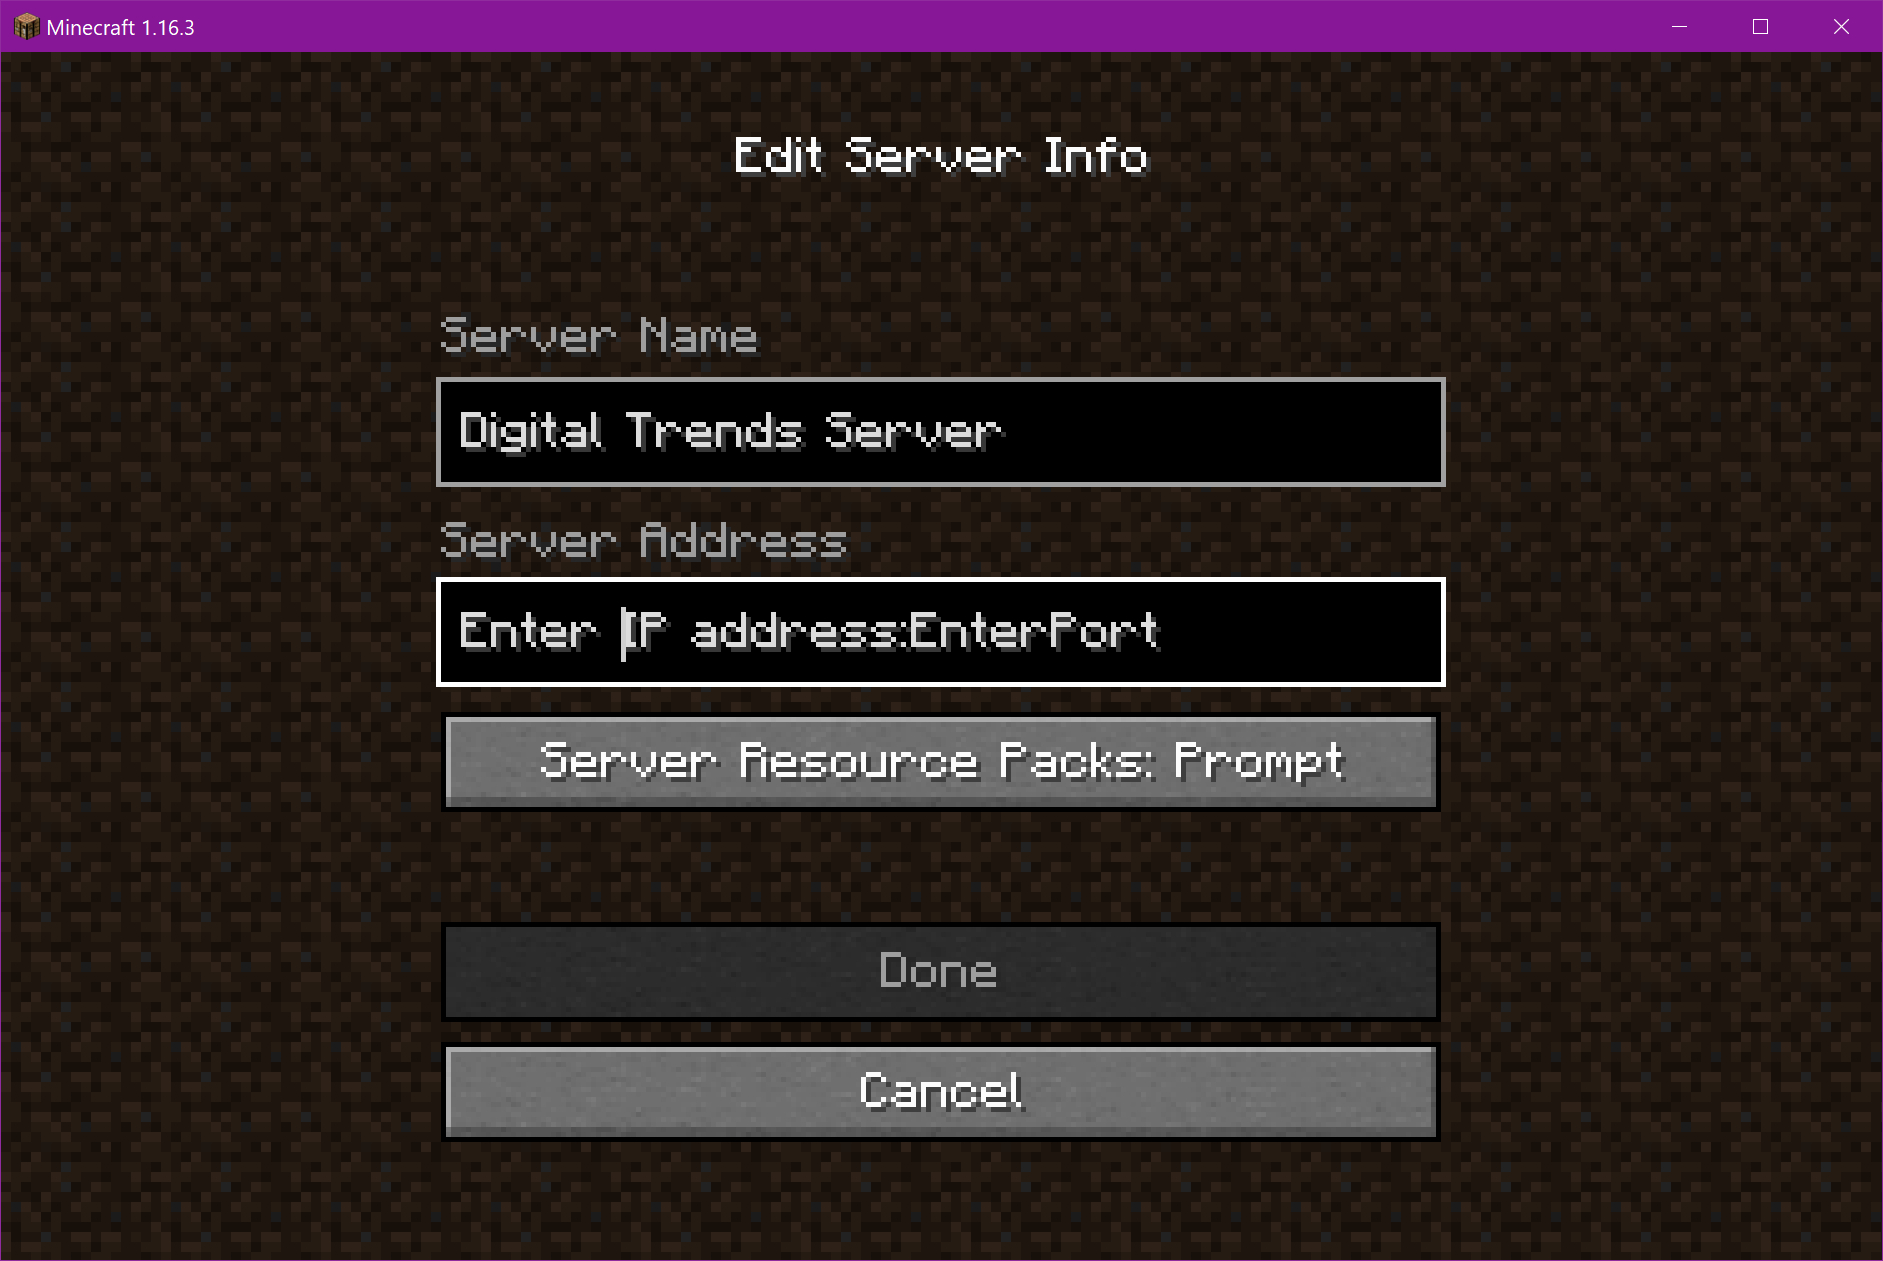 How to join minecraft servers on PS3 